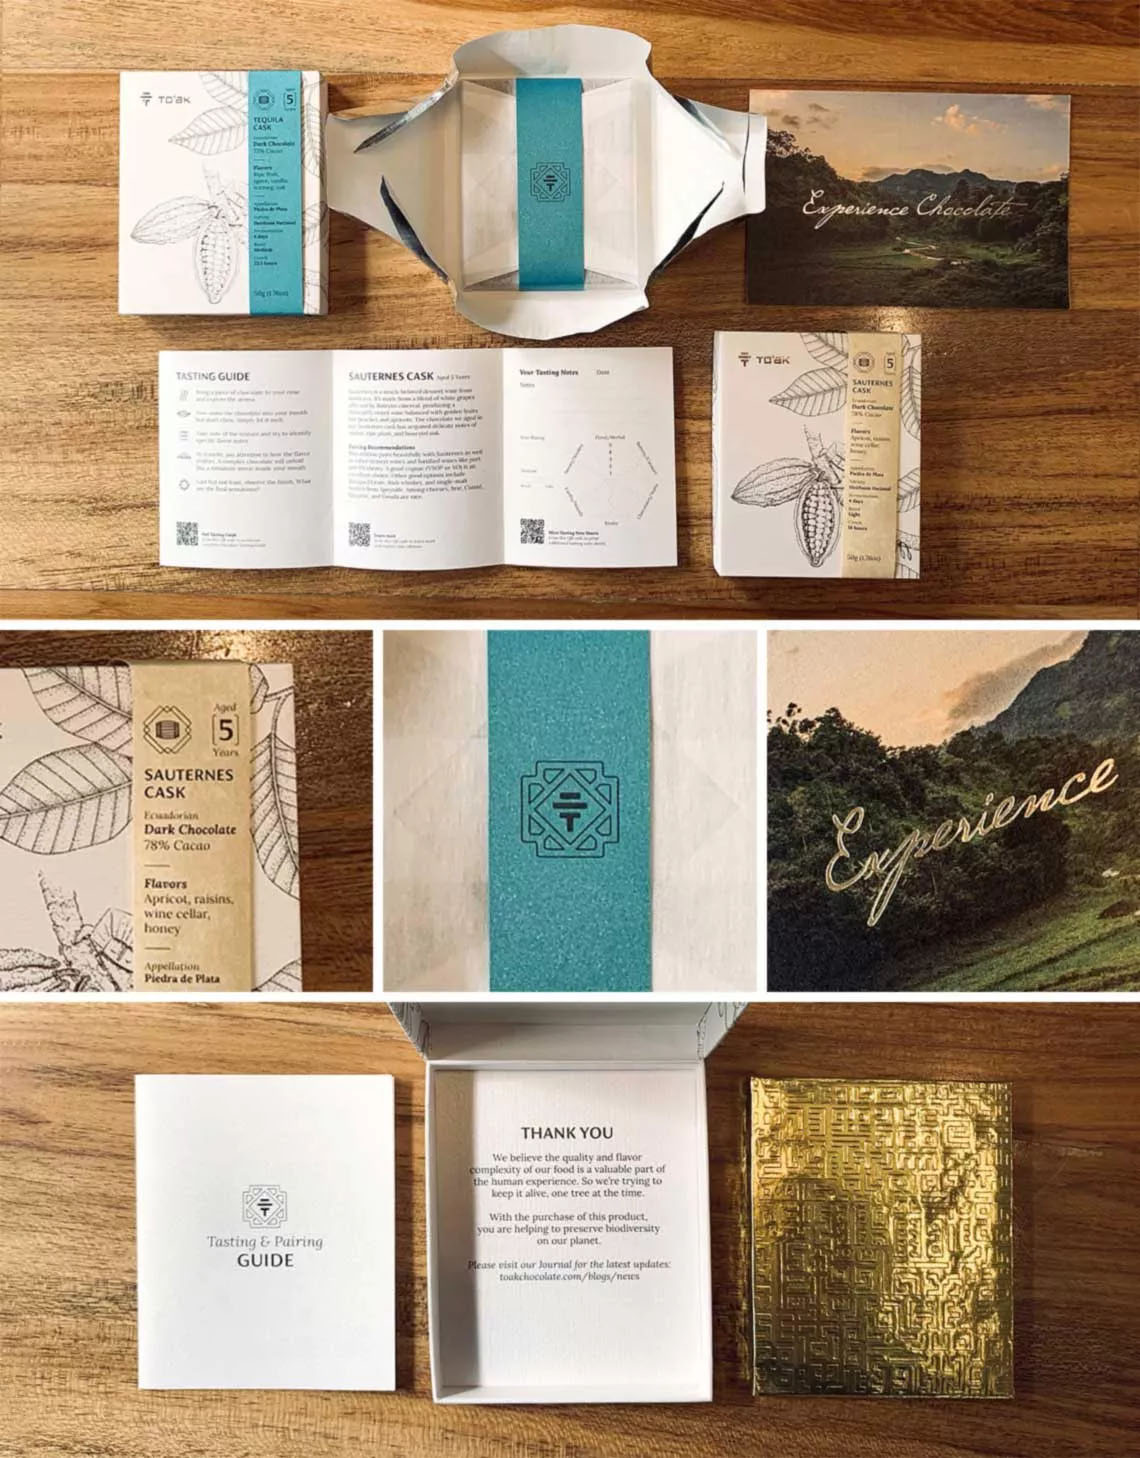 luxury chocolate brand To’ak custom packaging with product inserts.